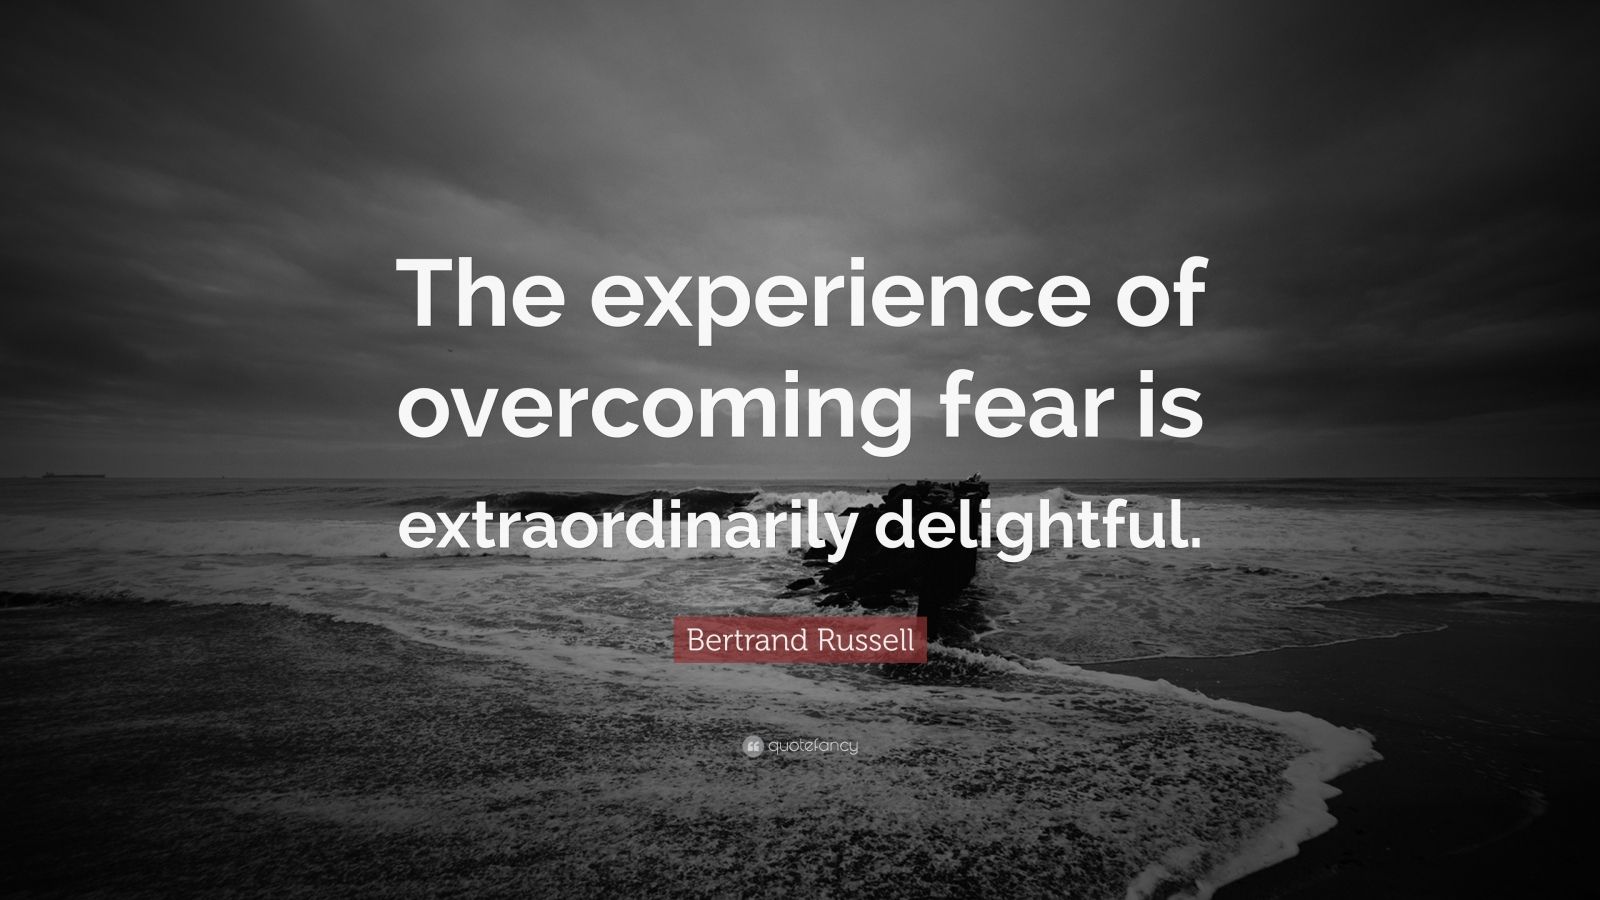 Bertrand Russell Quote: “The experience of overcoming fear is